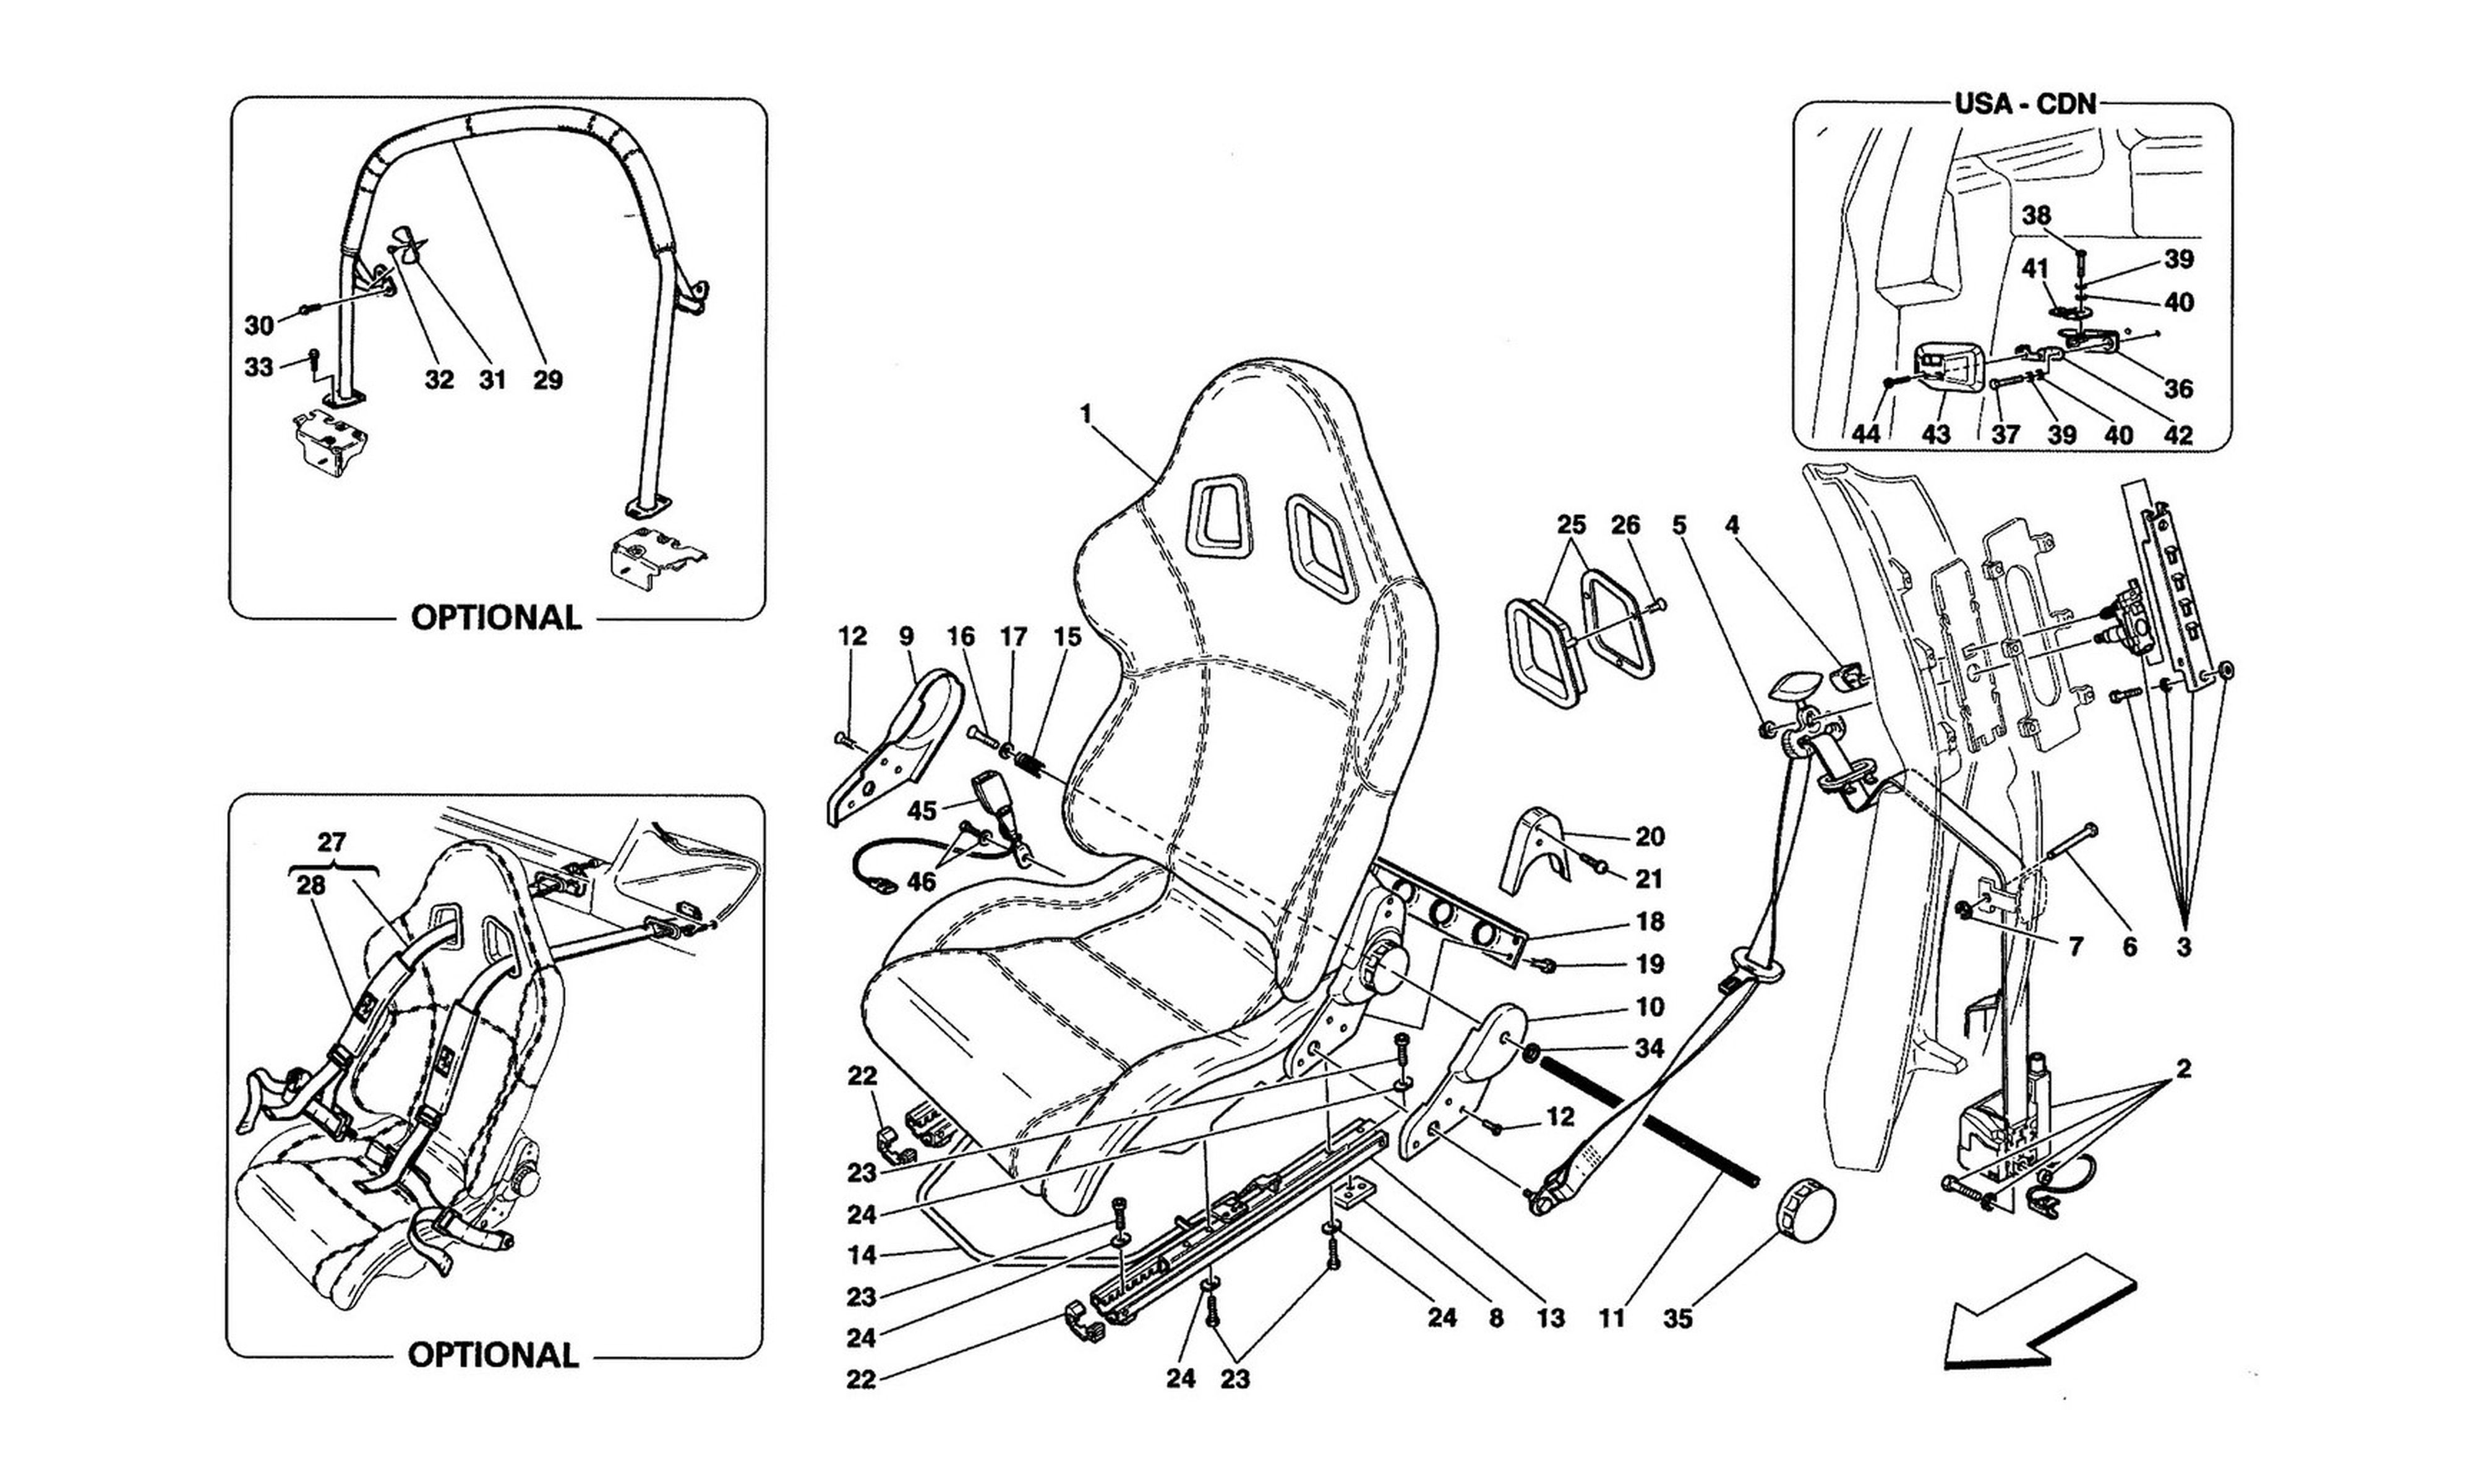 Schematic: Racing Seat-Safety Belts-Roll Bar